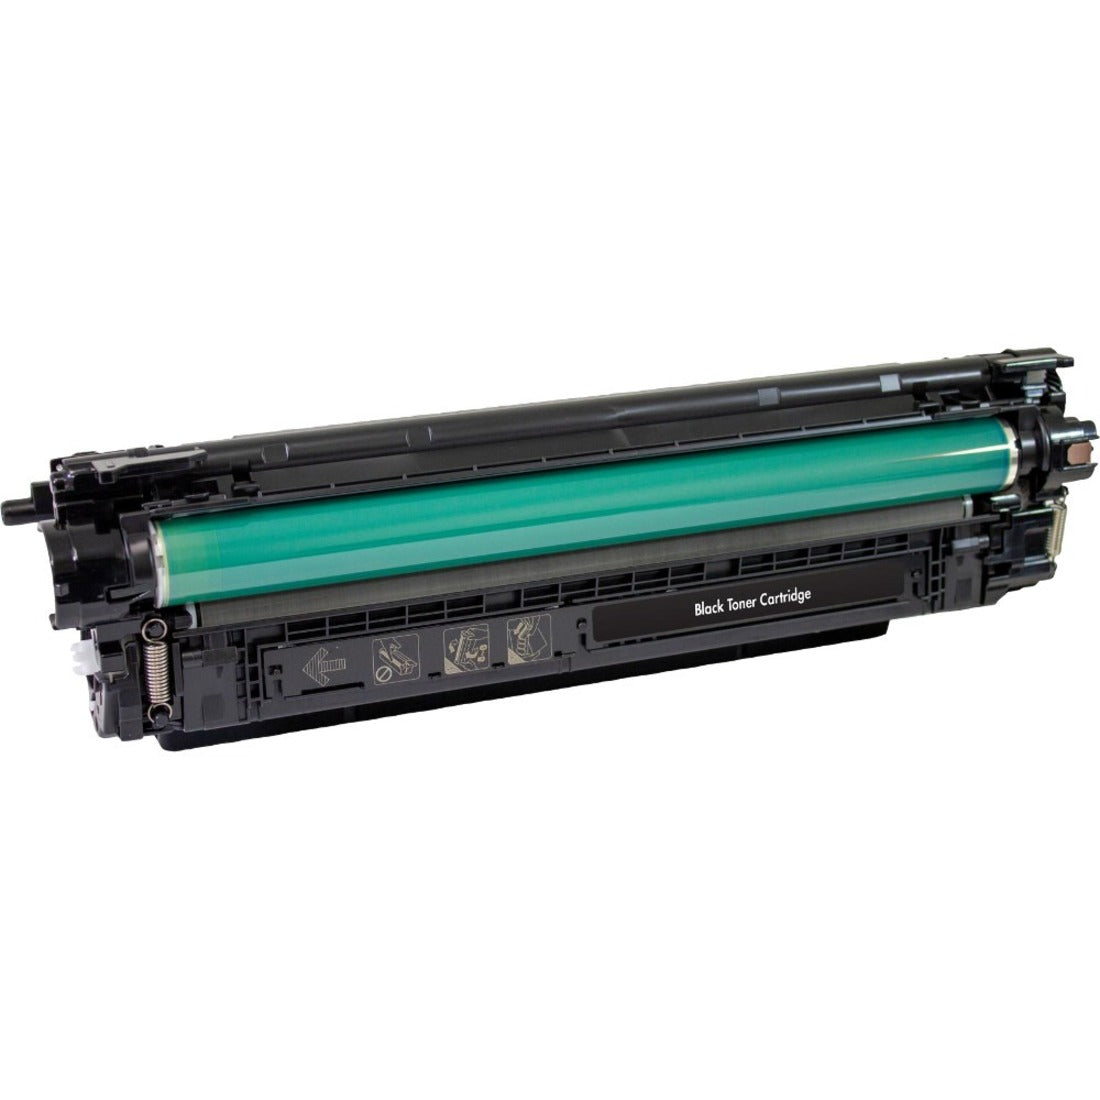 Clover Technologies 200941P Toner Cartridge, High Yield, Black, 12500 Pages